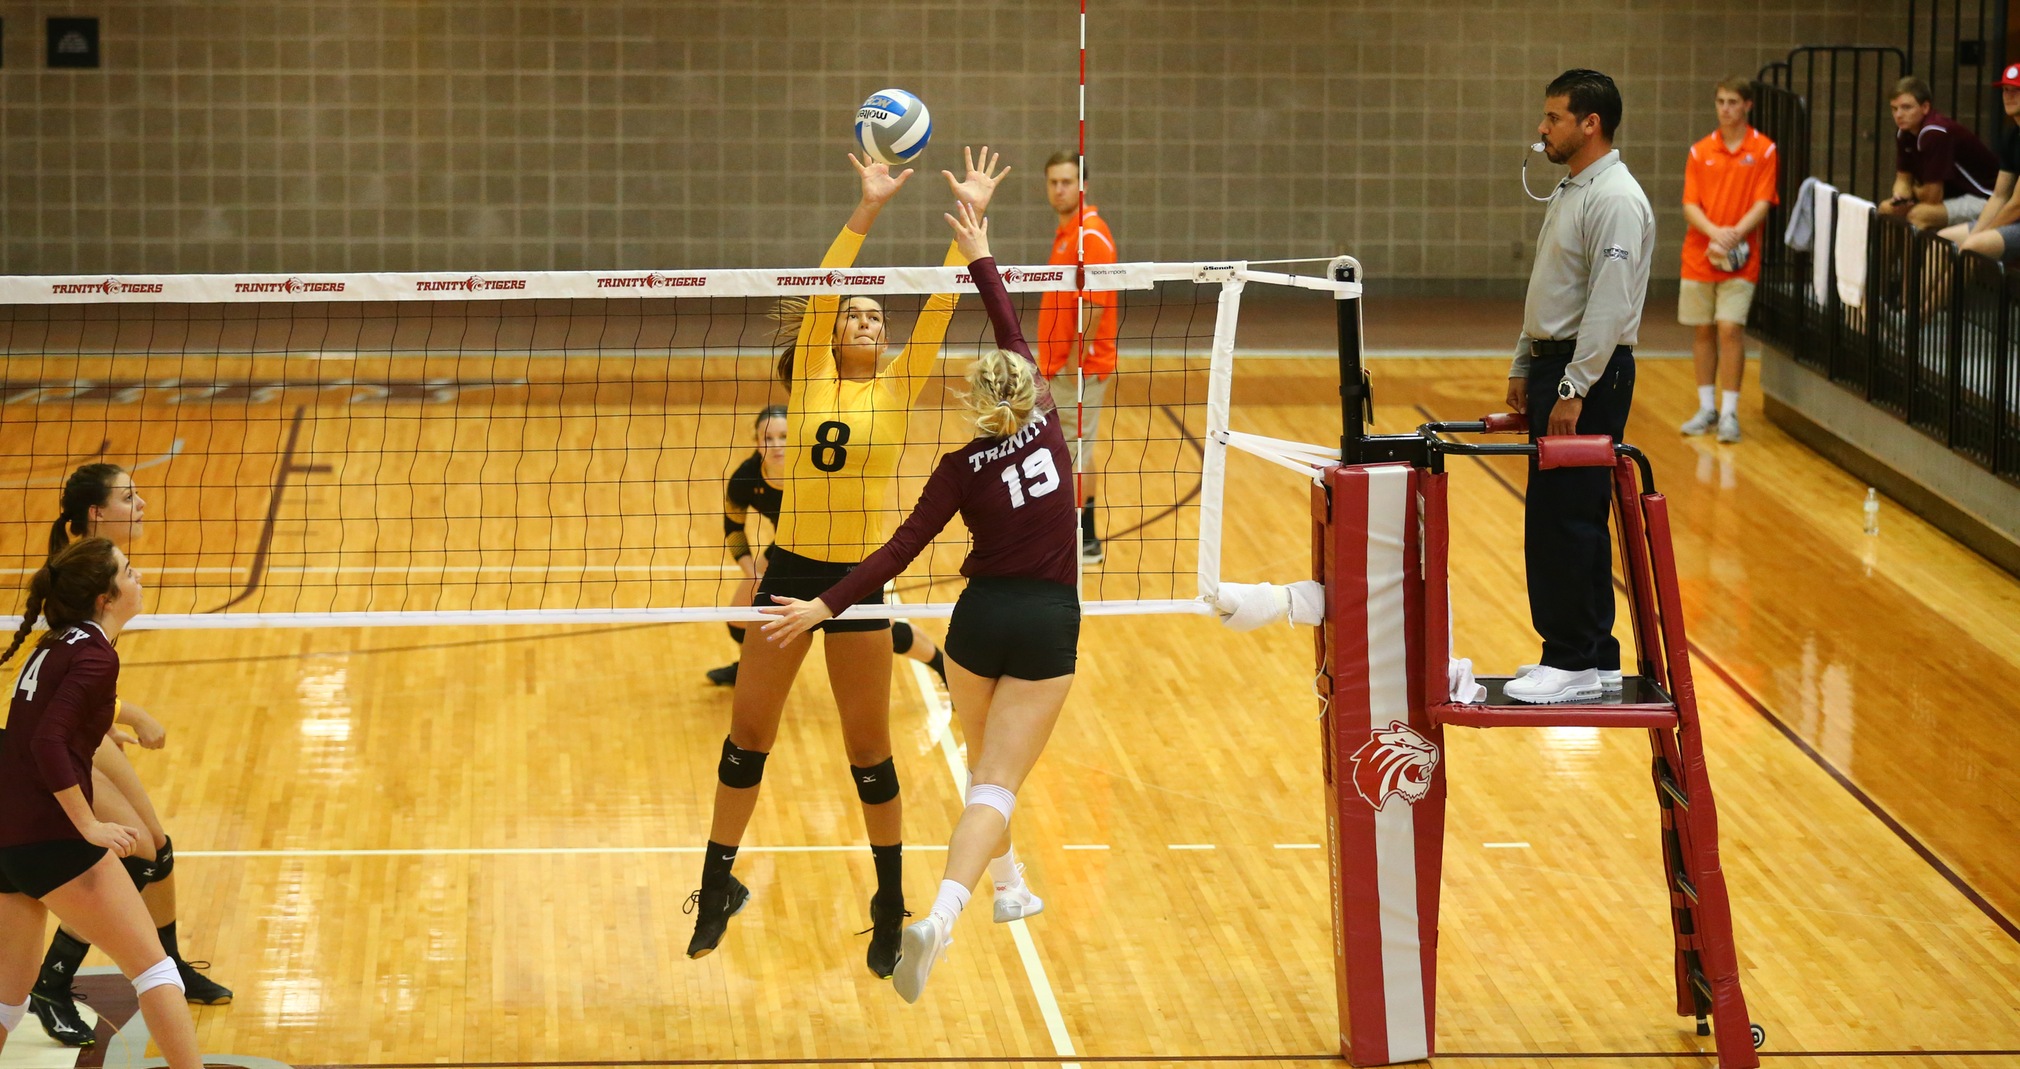 Tina Elstner had 13 kills and three digs during the Titans' victory over Whitman College.